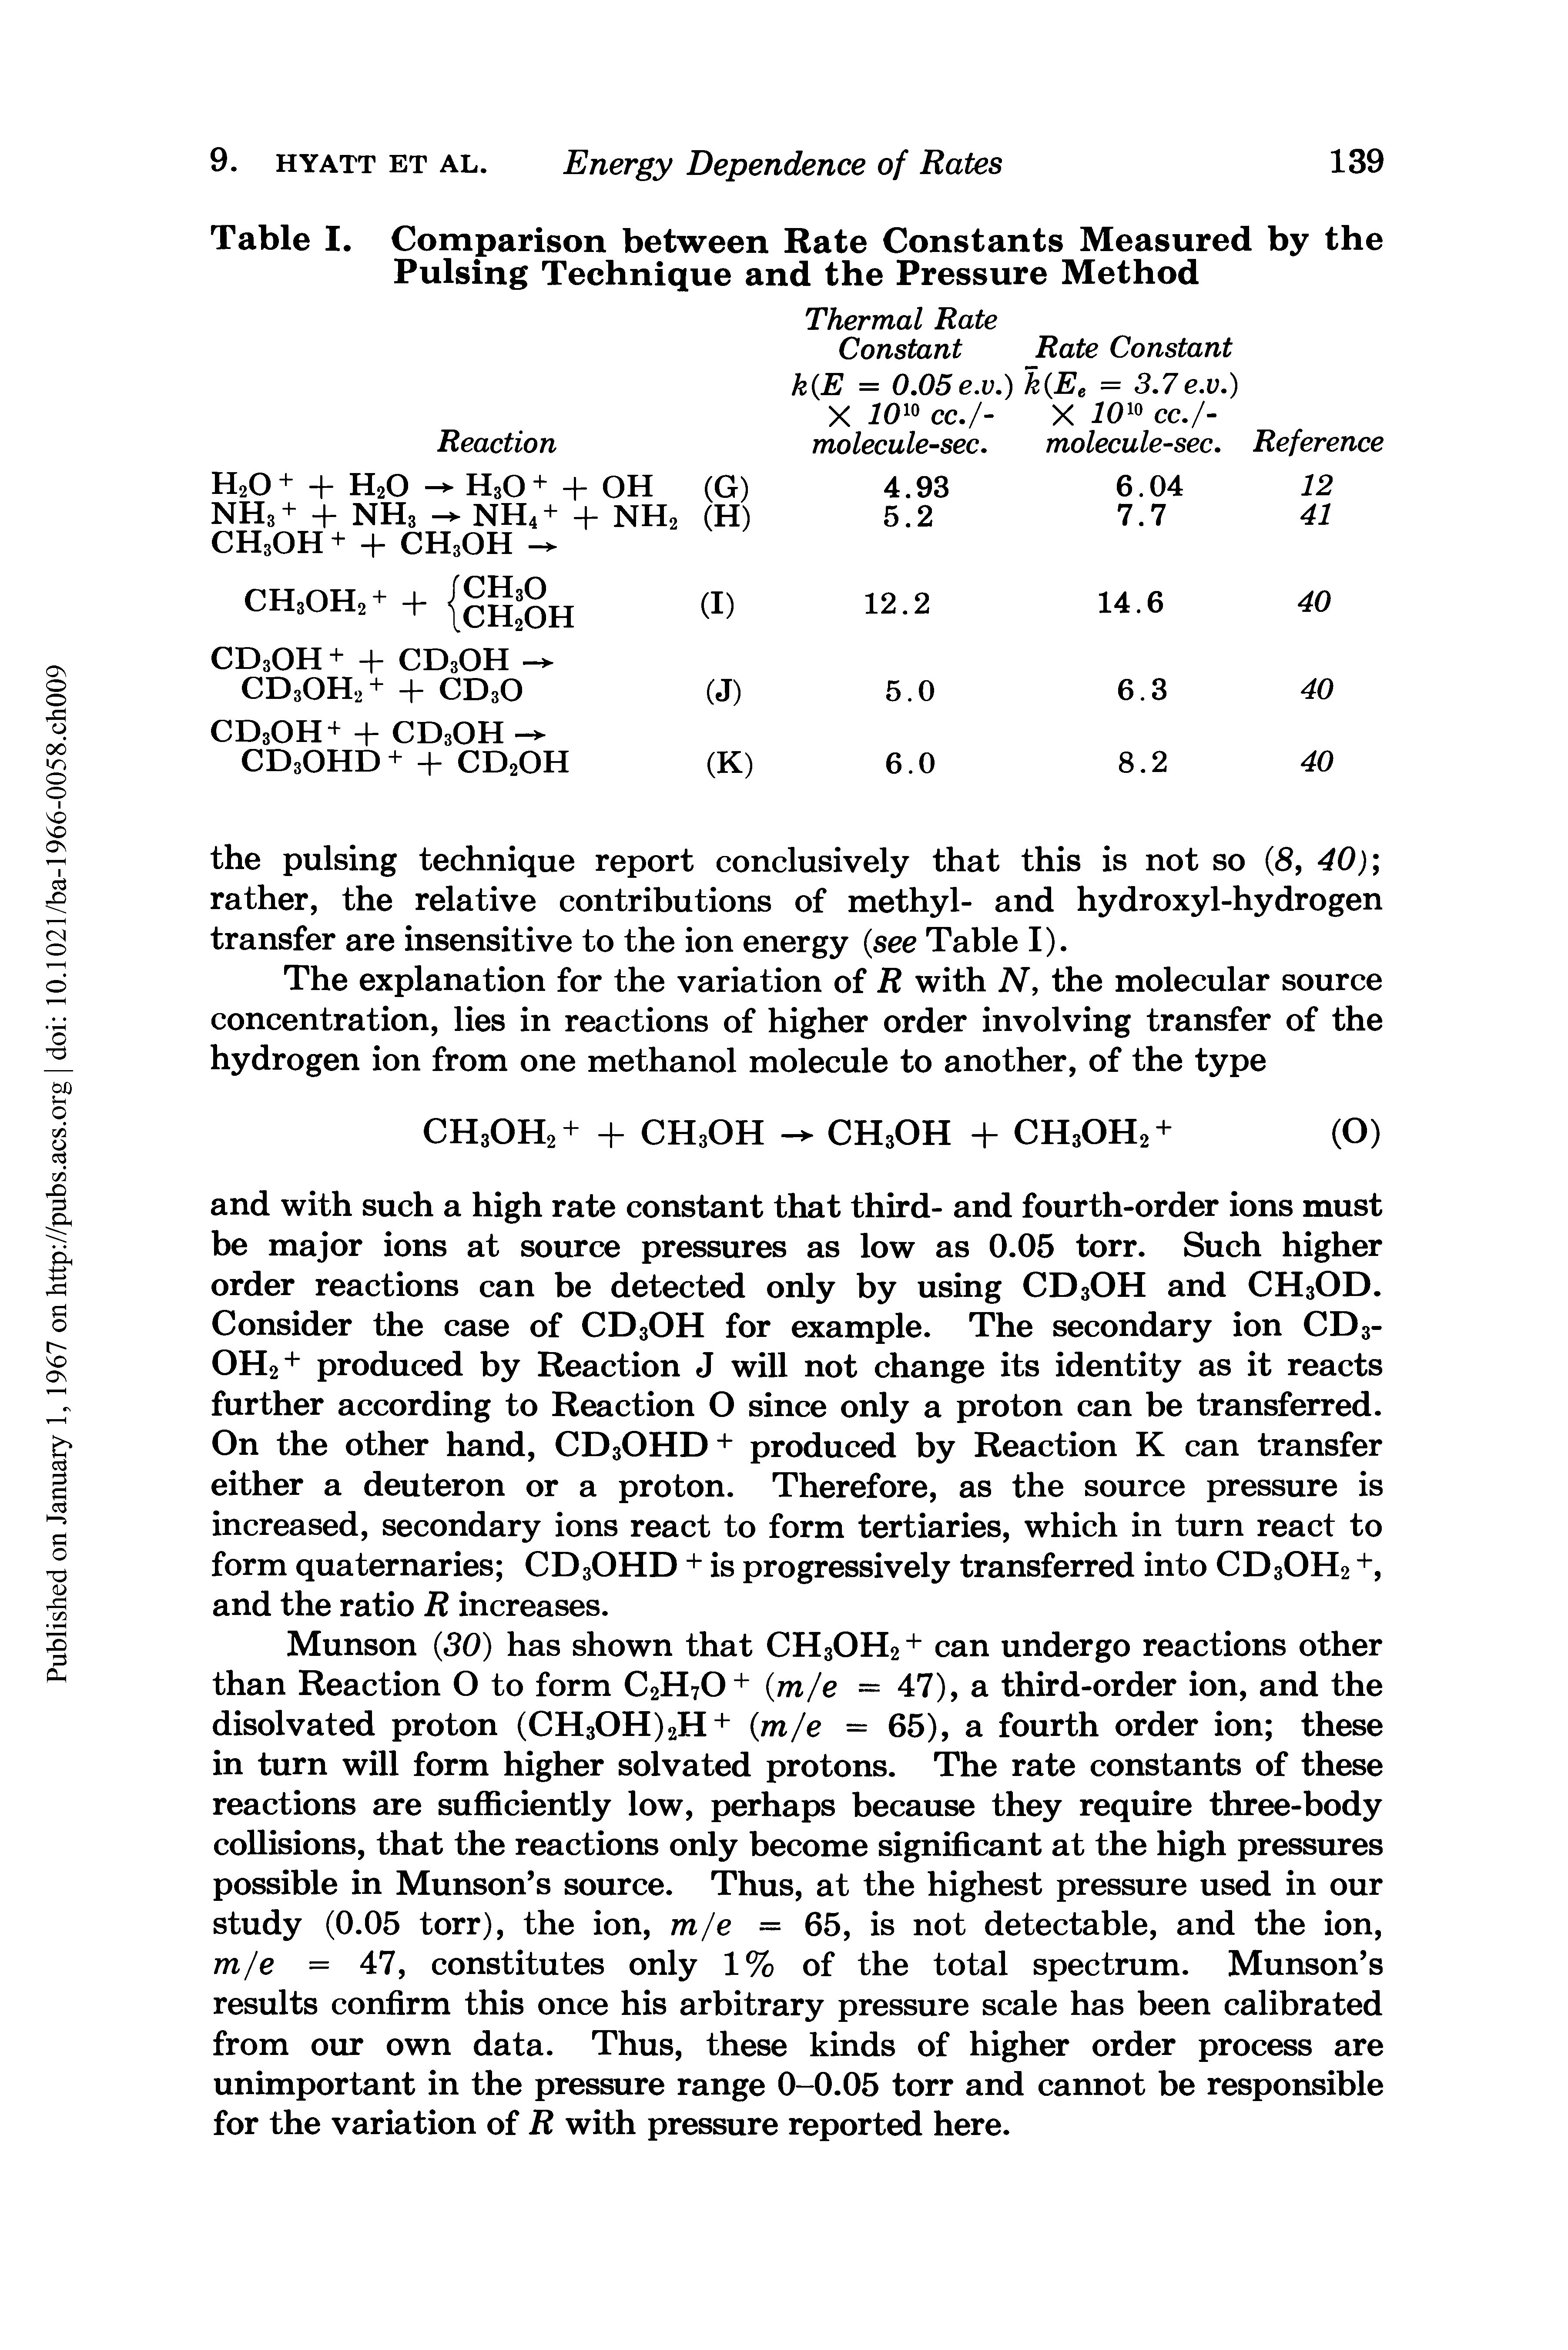 Table I. Comparison between Rate Constants Measured by the Pulsing Technique and the Pressure Method...